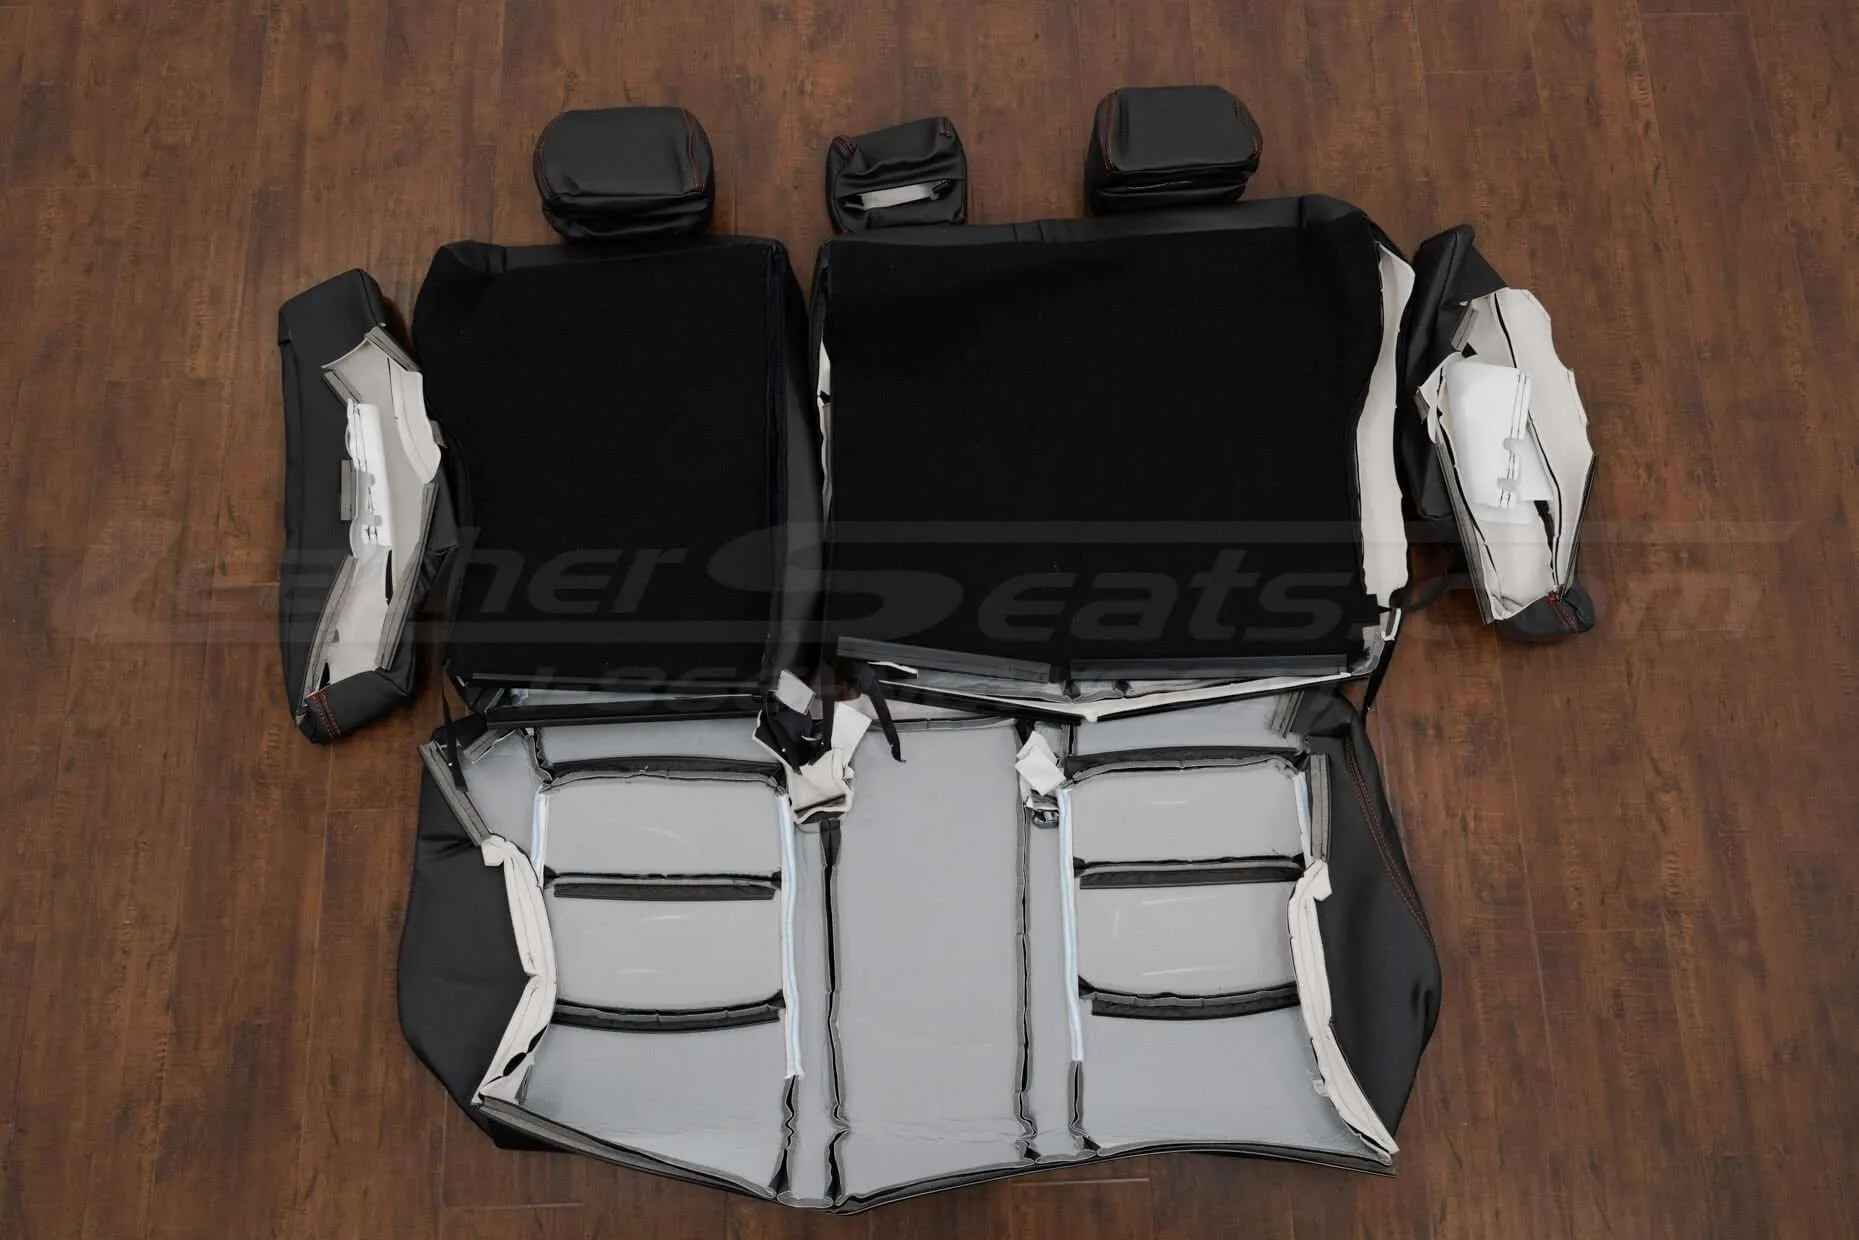 Back view of rear seats and bolsters